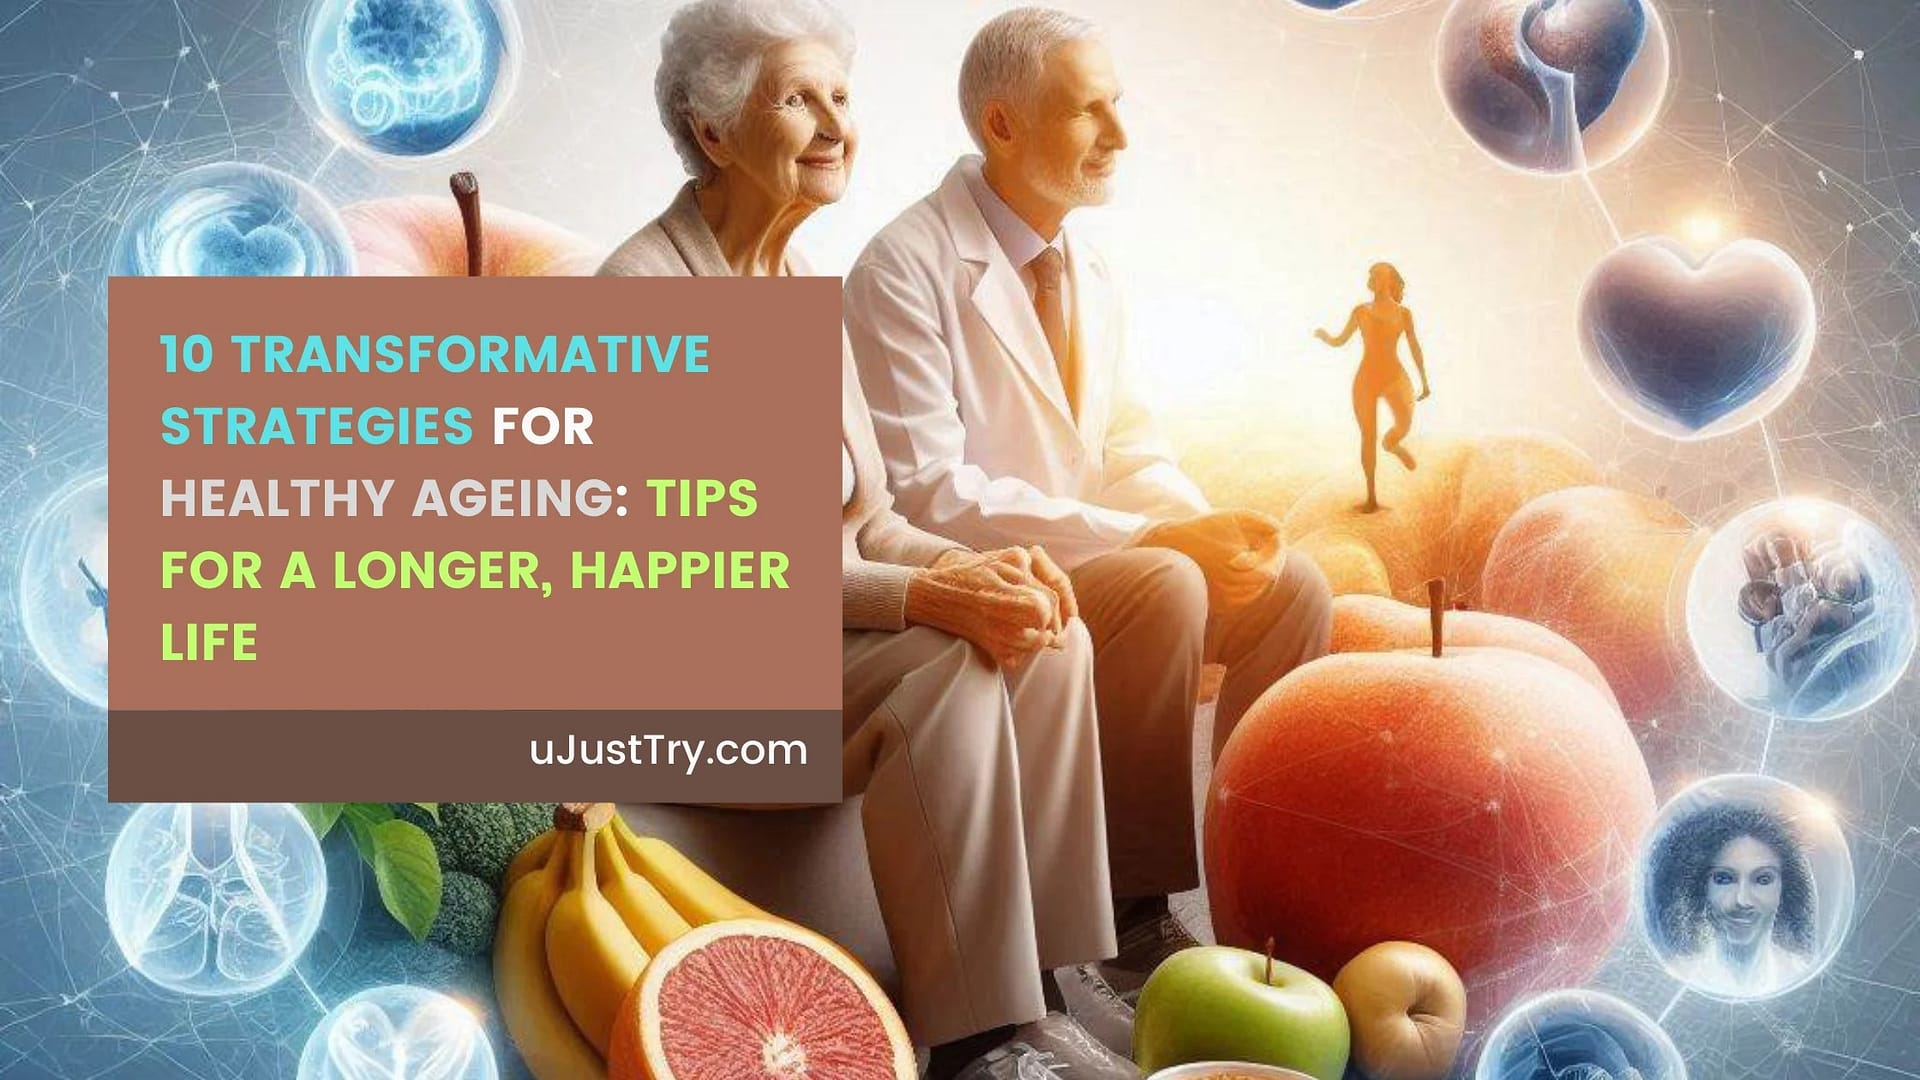 10 Transformative Strategies for Healthy Ageing: Tips for a Longer, Happier Life